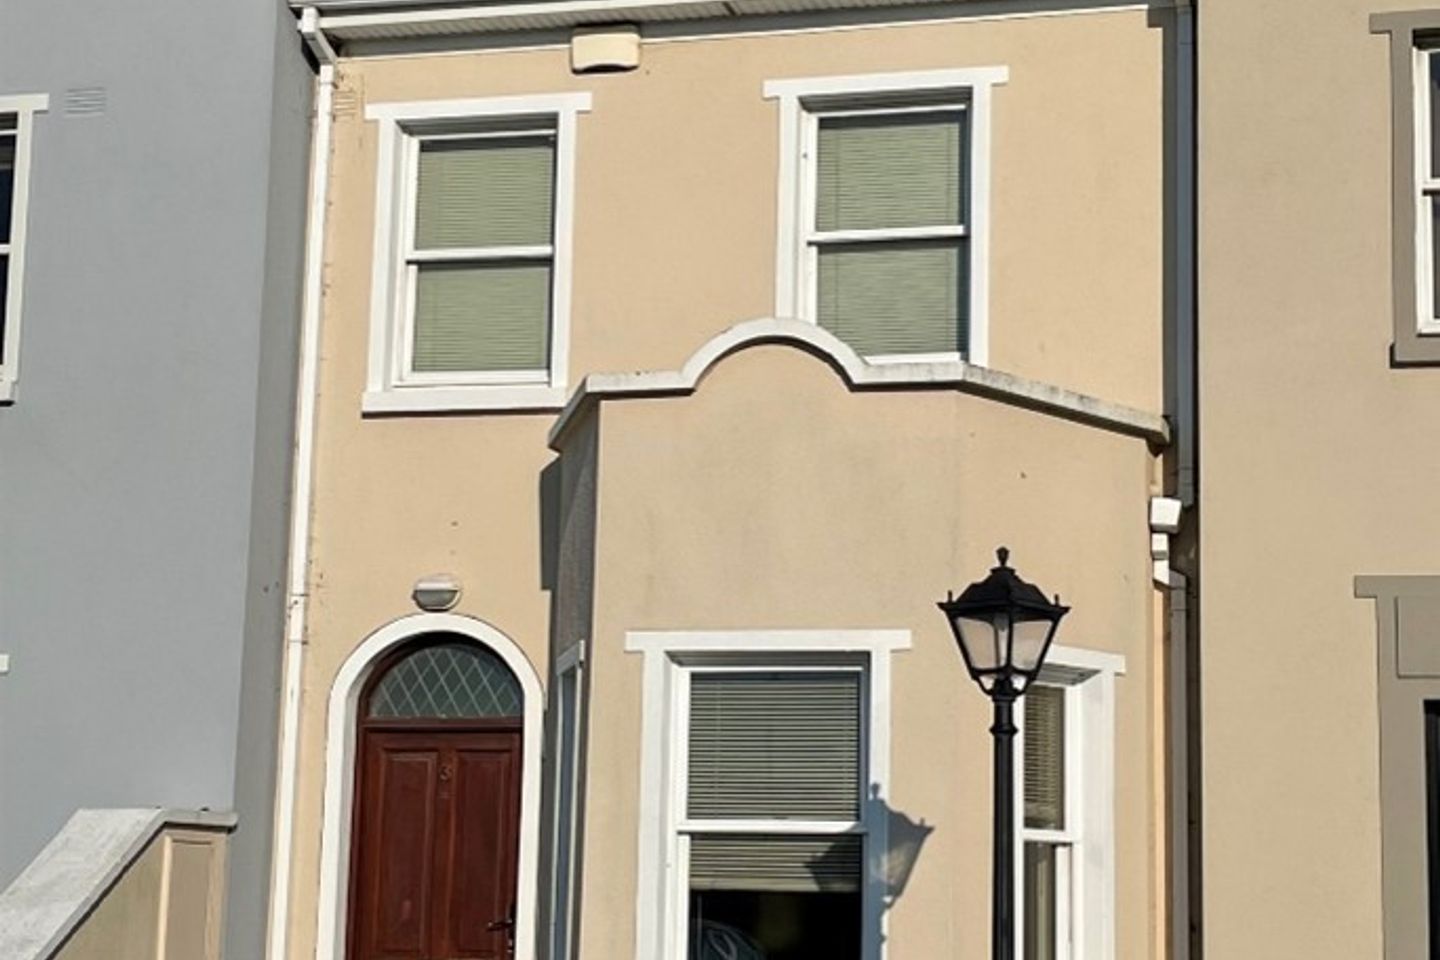 3 College Crescent, College Road, Galway City, Co. Galway